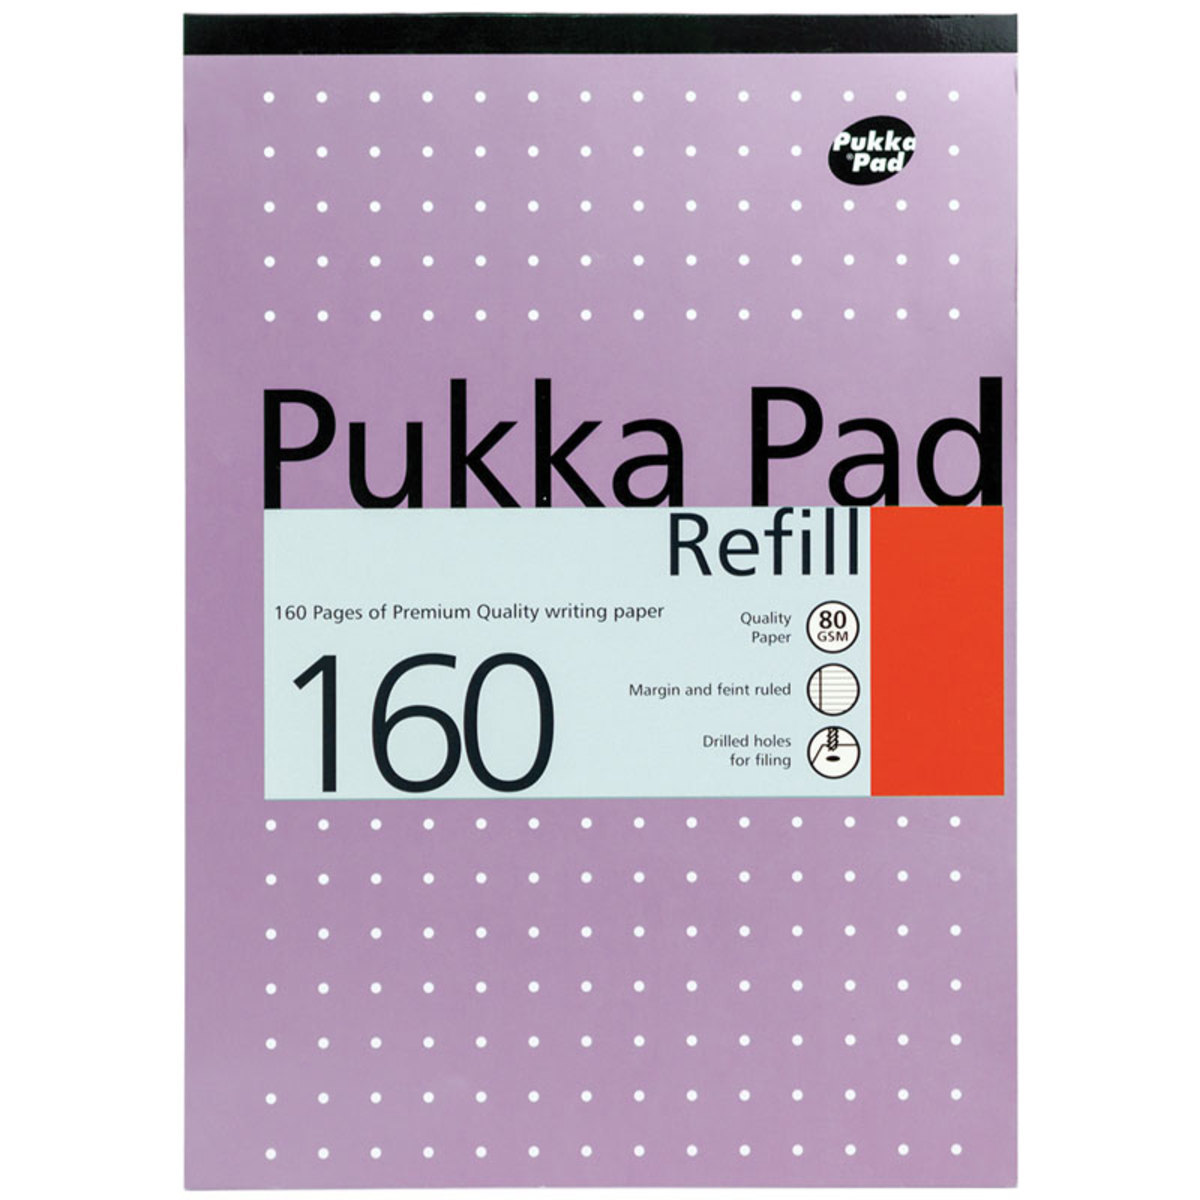 Pukka Pads A4 Headbound Refill Pad 80gsm 160 Pages - Pack of 12 Pads